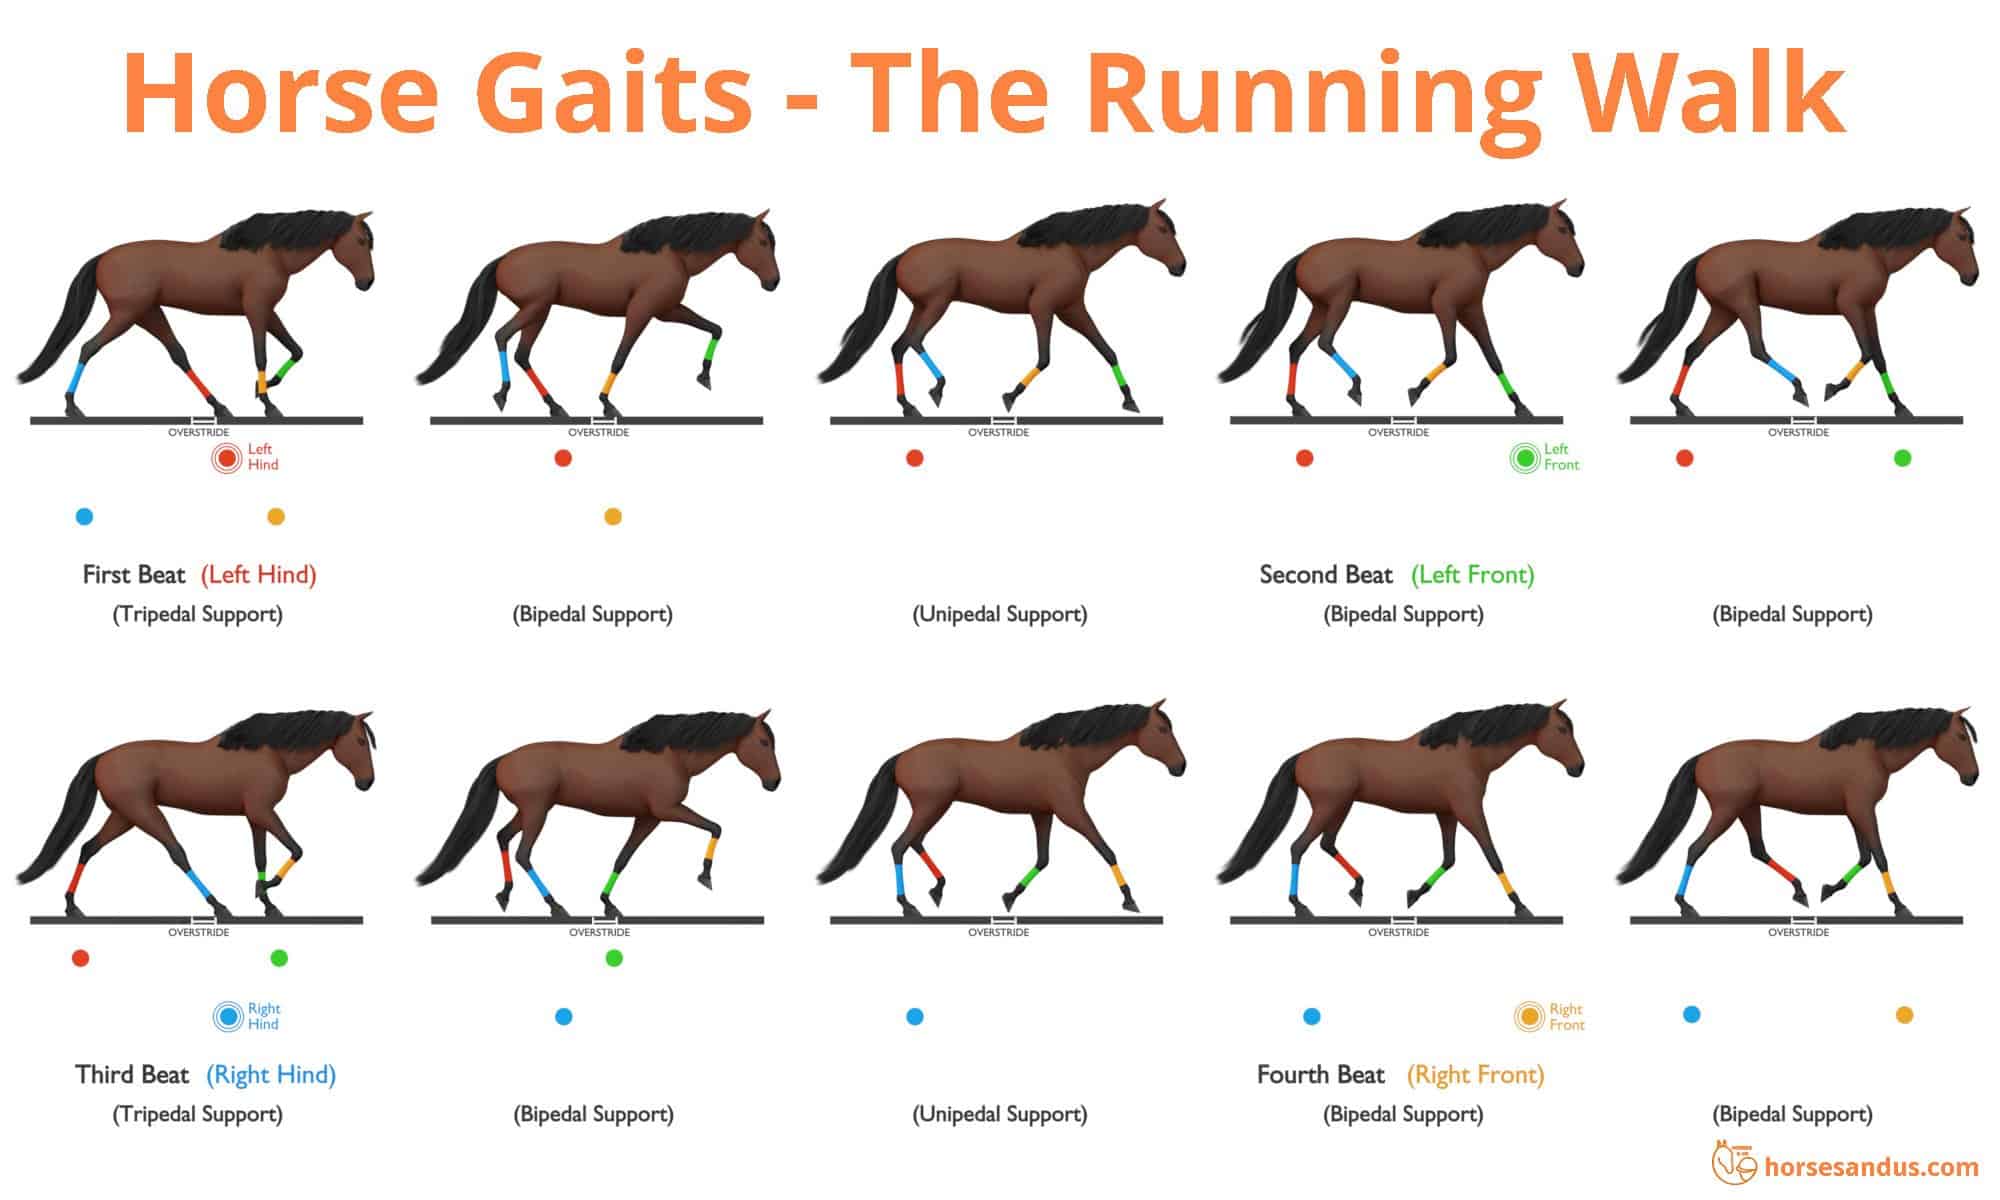 Sequence of footfalls for the Running Walk - Tennessee Walking Horse